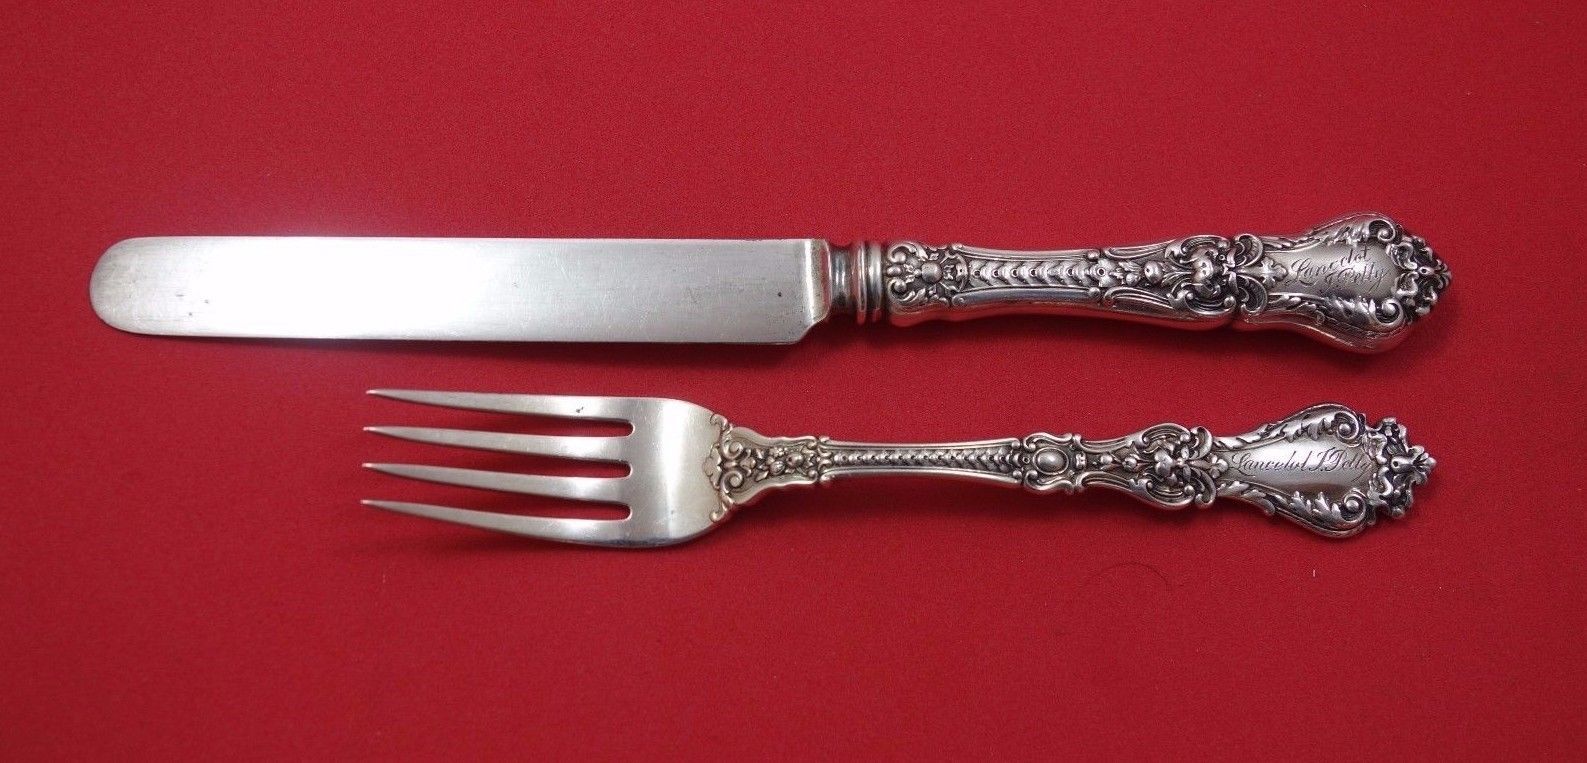 Primary image for Henry II by Gorham Sterling Silver Junior Set 2pc (Knife 7 1/2" and Fork 5 3/4")